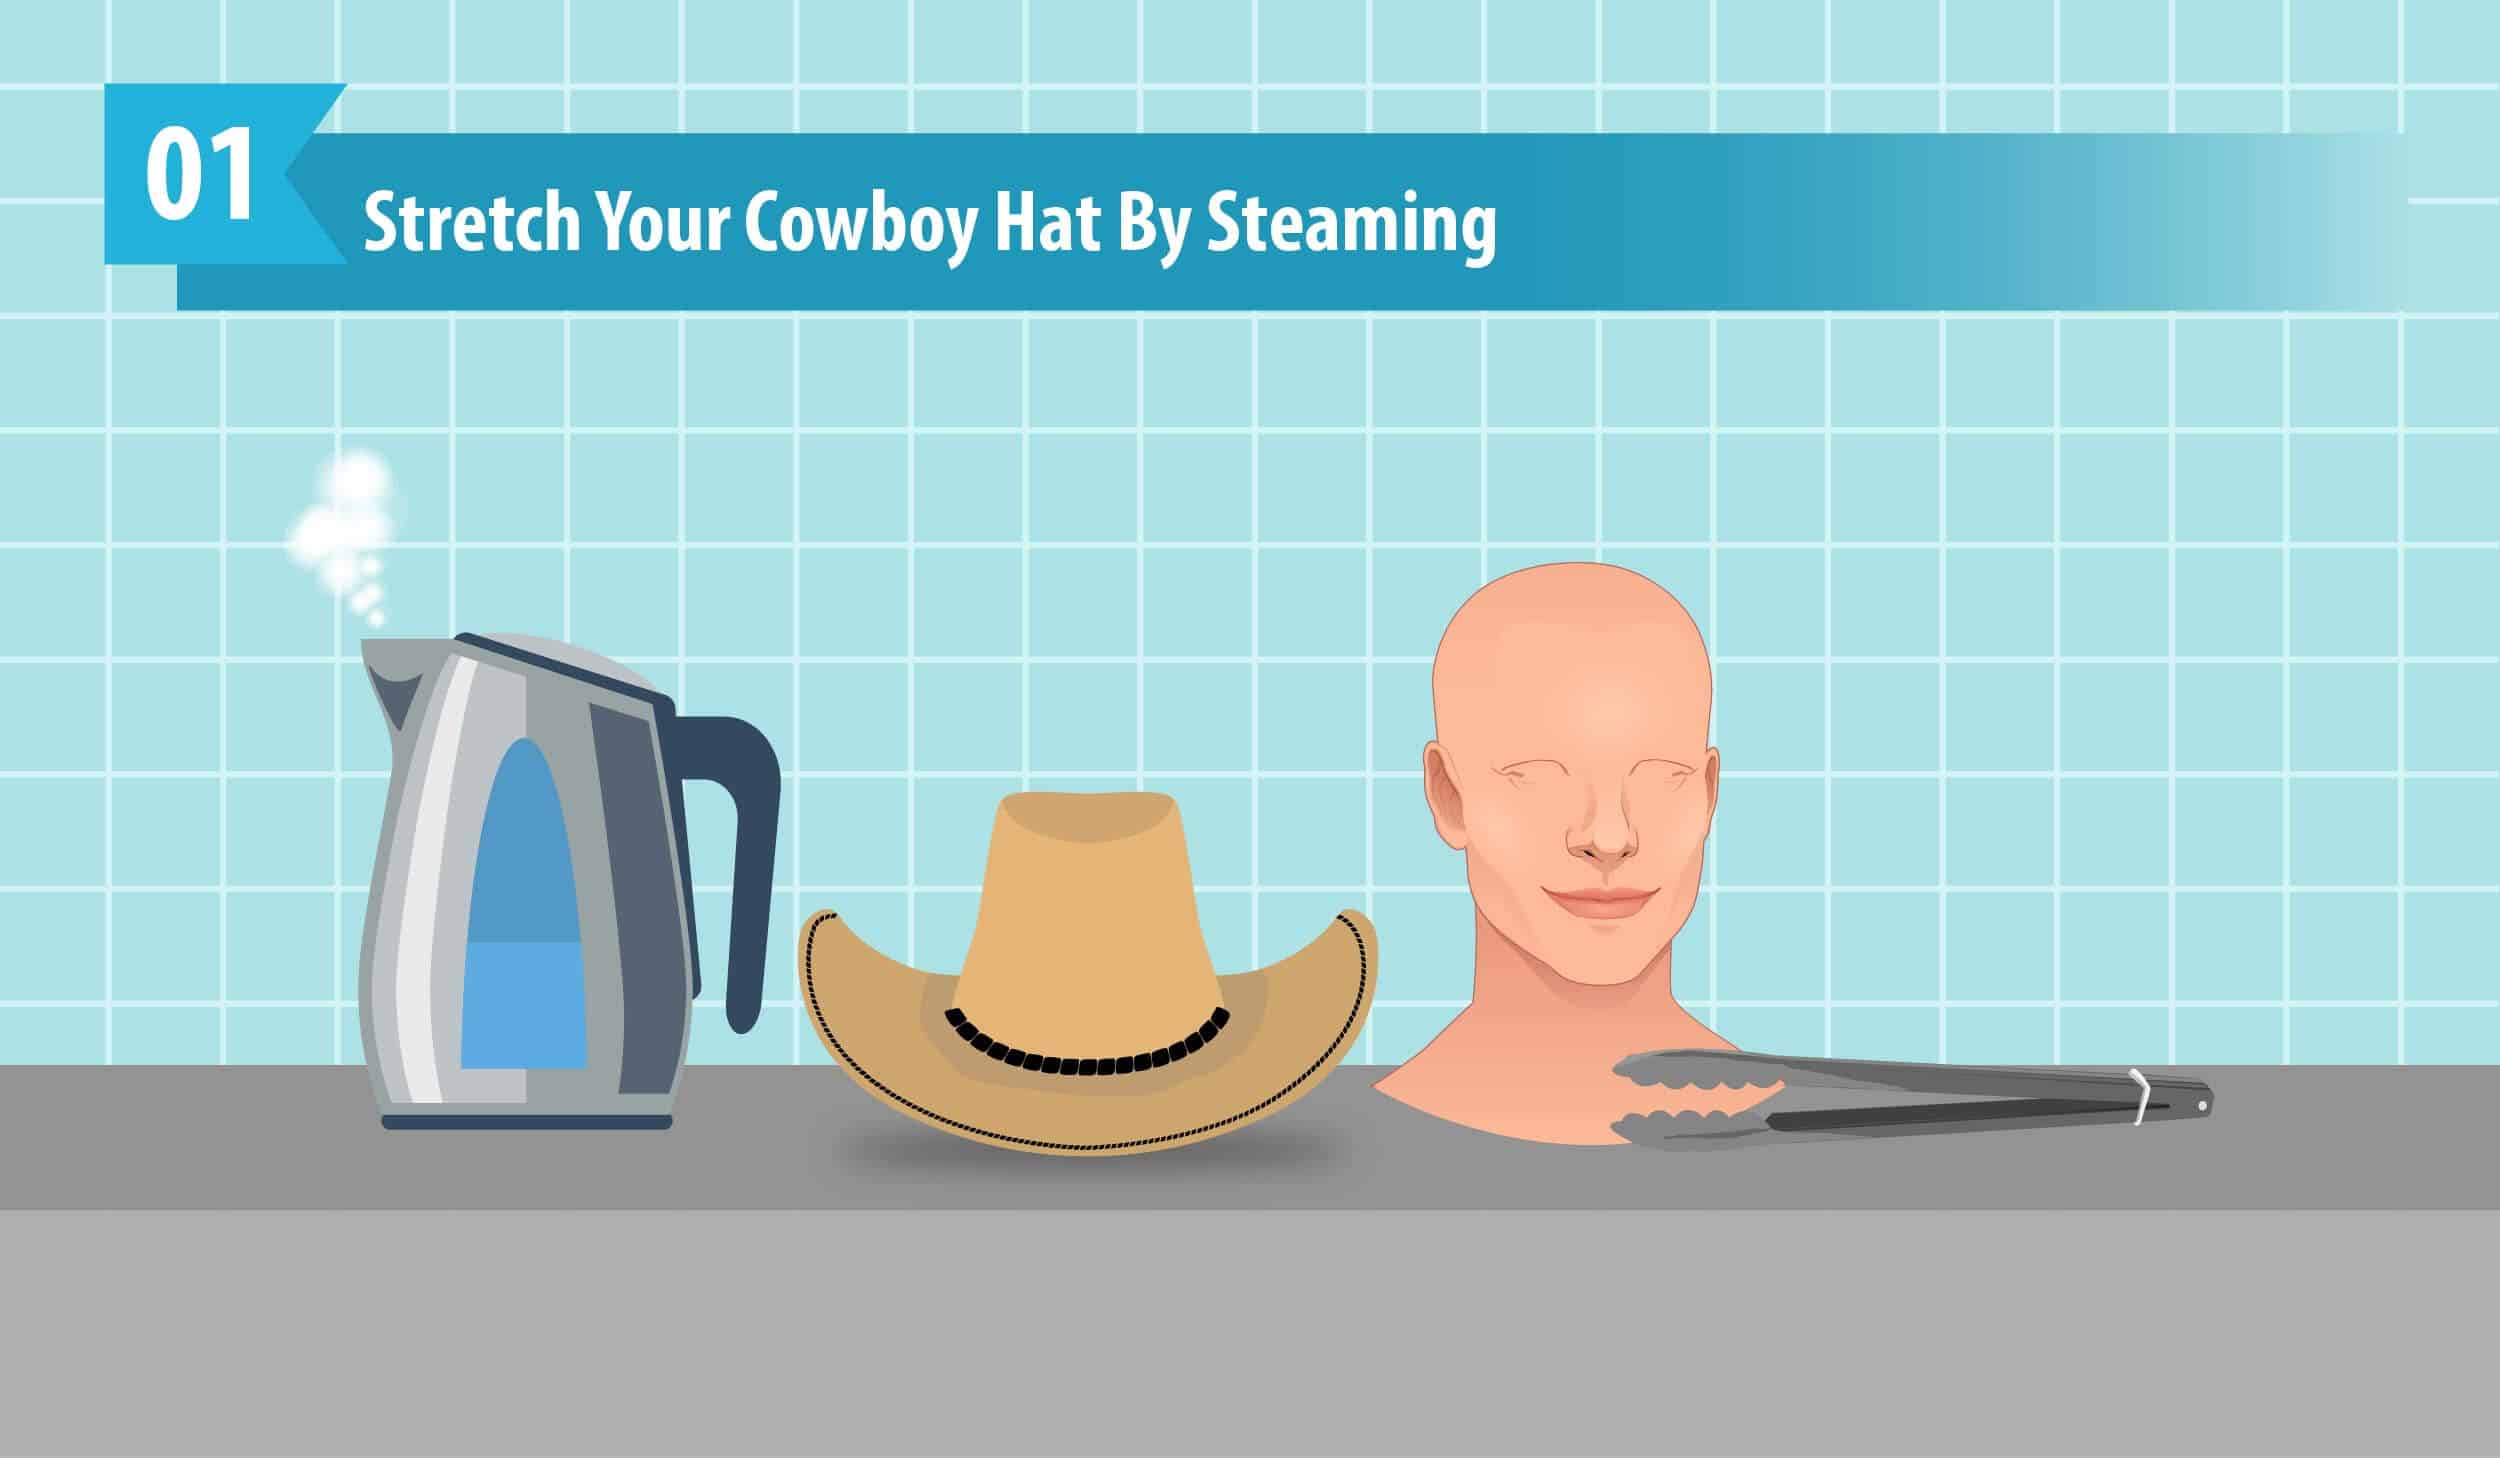 Stretch Your Cowboy Hat By Steaming